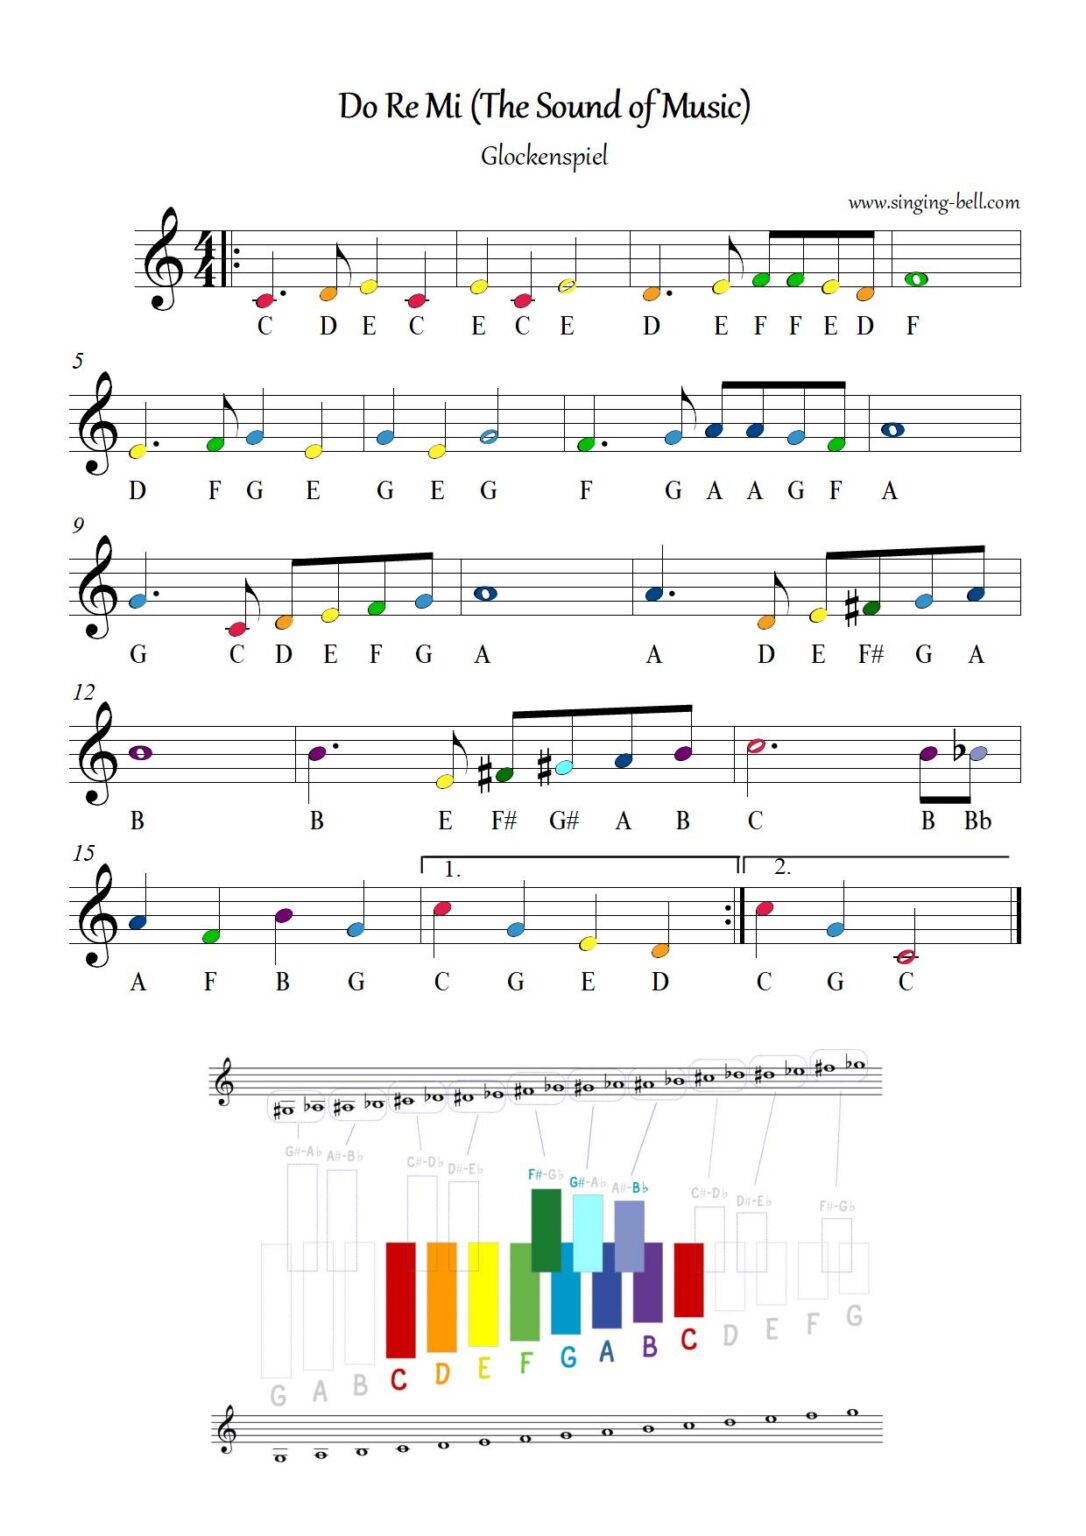 Do Re Mi (The Sound of Music) for Glockenspiel / Xylophone